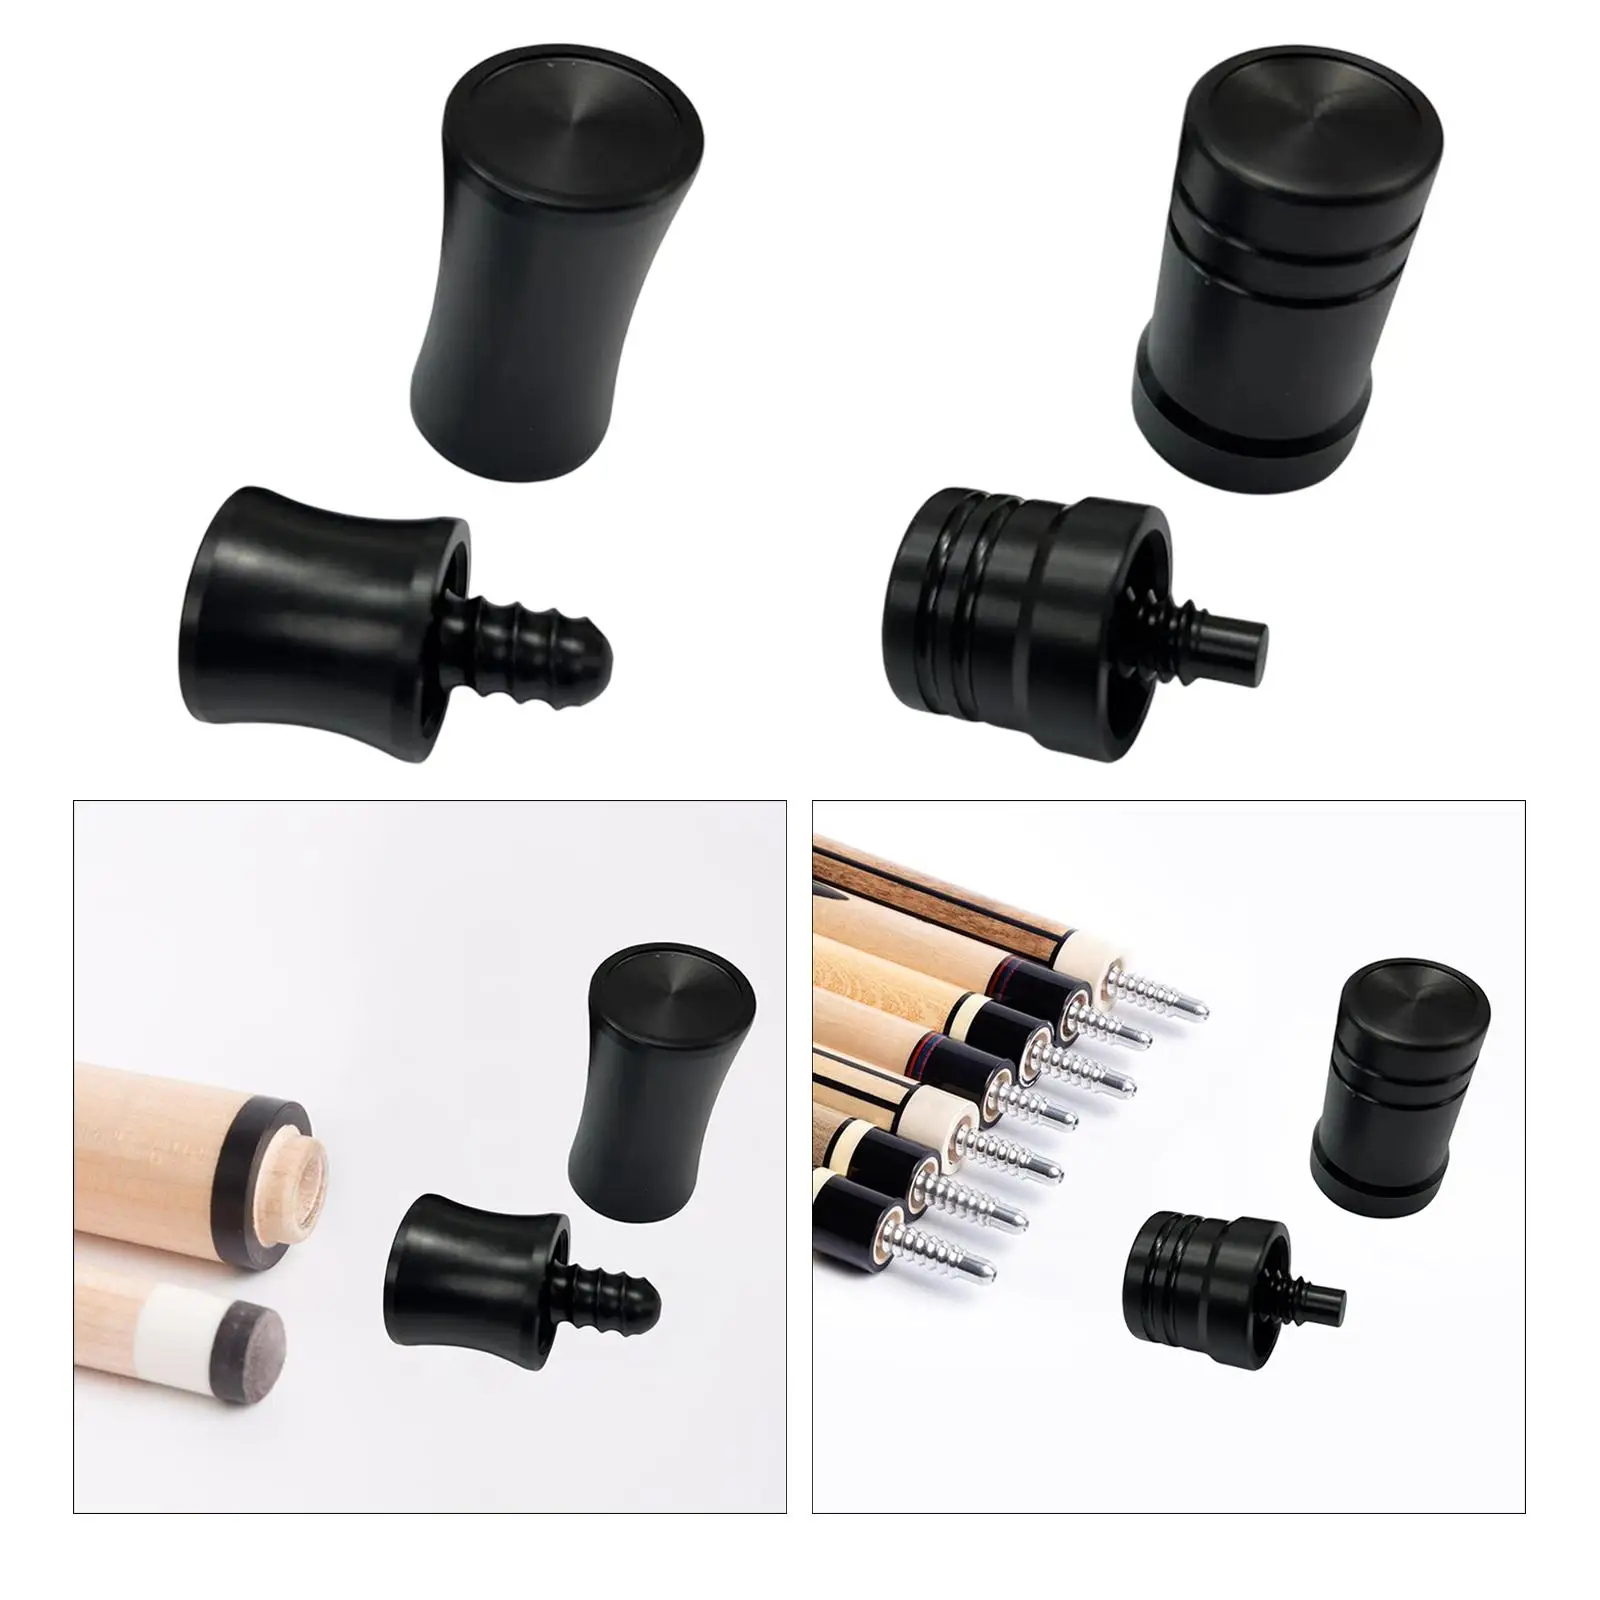 Joint Protector for Pool Cue Billiards Stick Sporting Protection Joint Caps Tip Tools for Protect Shaft and Head Equipment